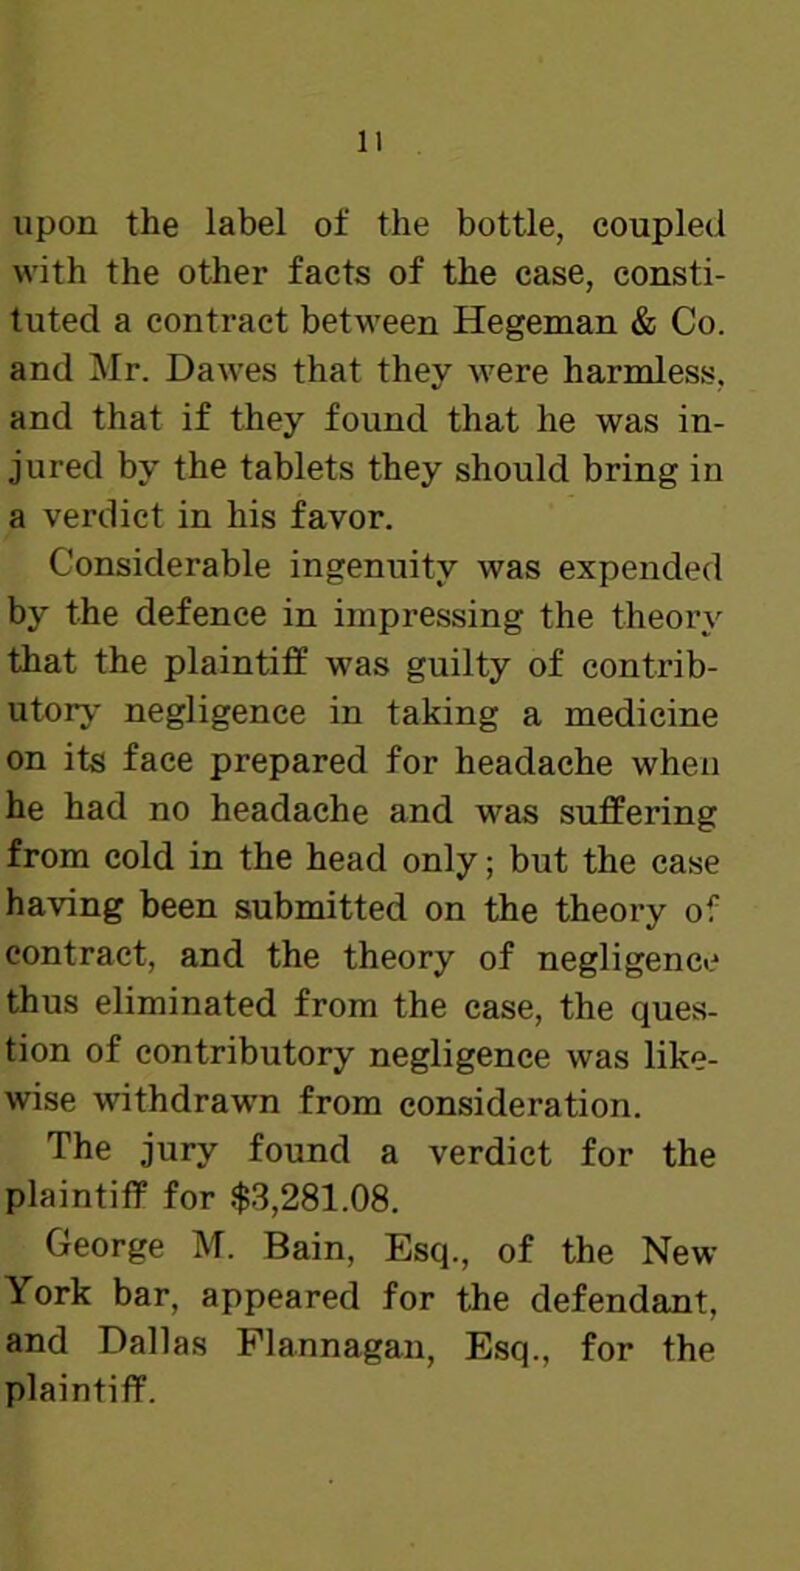 upon the label of the bottle, coupled with the other facts of the case, consti- tuted a contract between Hegeman & Co. and Mr. Dawes that they were harmless, and that if they found that he was in- jured by the tablets they should bring in a verdict in his favor. Considerable ingenuity was expended by the defence in impressing the theory that the plaintiff was guilty of contrib- utory negligence in taking a medicine on its face prepared for headache when he had no headache and was suffering from cold in the head only; but the case having been submitted on the theory of contract, and the theory of negligence thus eliminated from the case, the ques- tion of contributory negligence was like- wise withdrawn from consideration. The jury found a verdict for the plaintiff for $3,281.08. George M. Bain, Esq., of the New York bar, appeared for the defendant, and Dallas Flannagan, Esq., for the plaintiff.